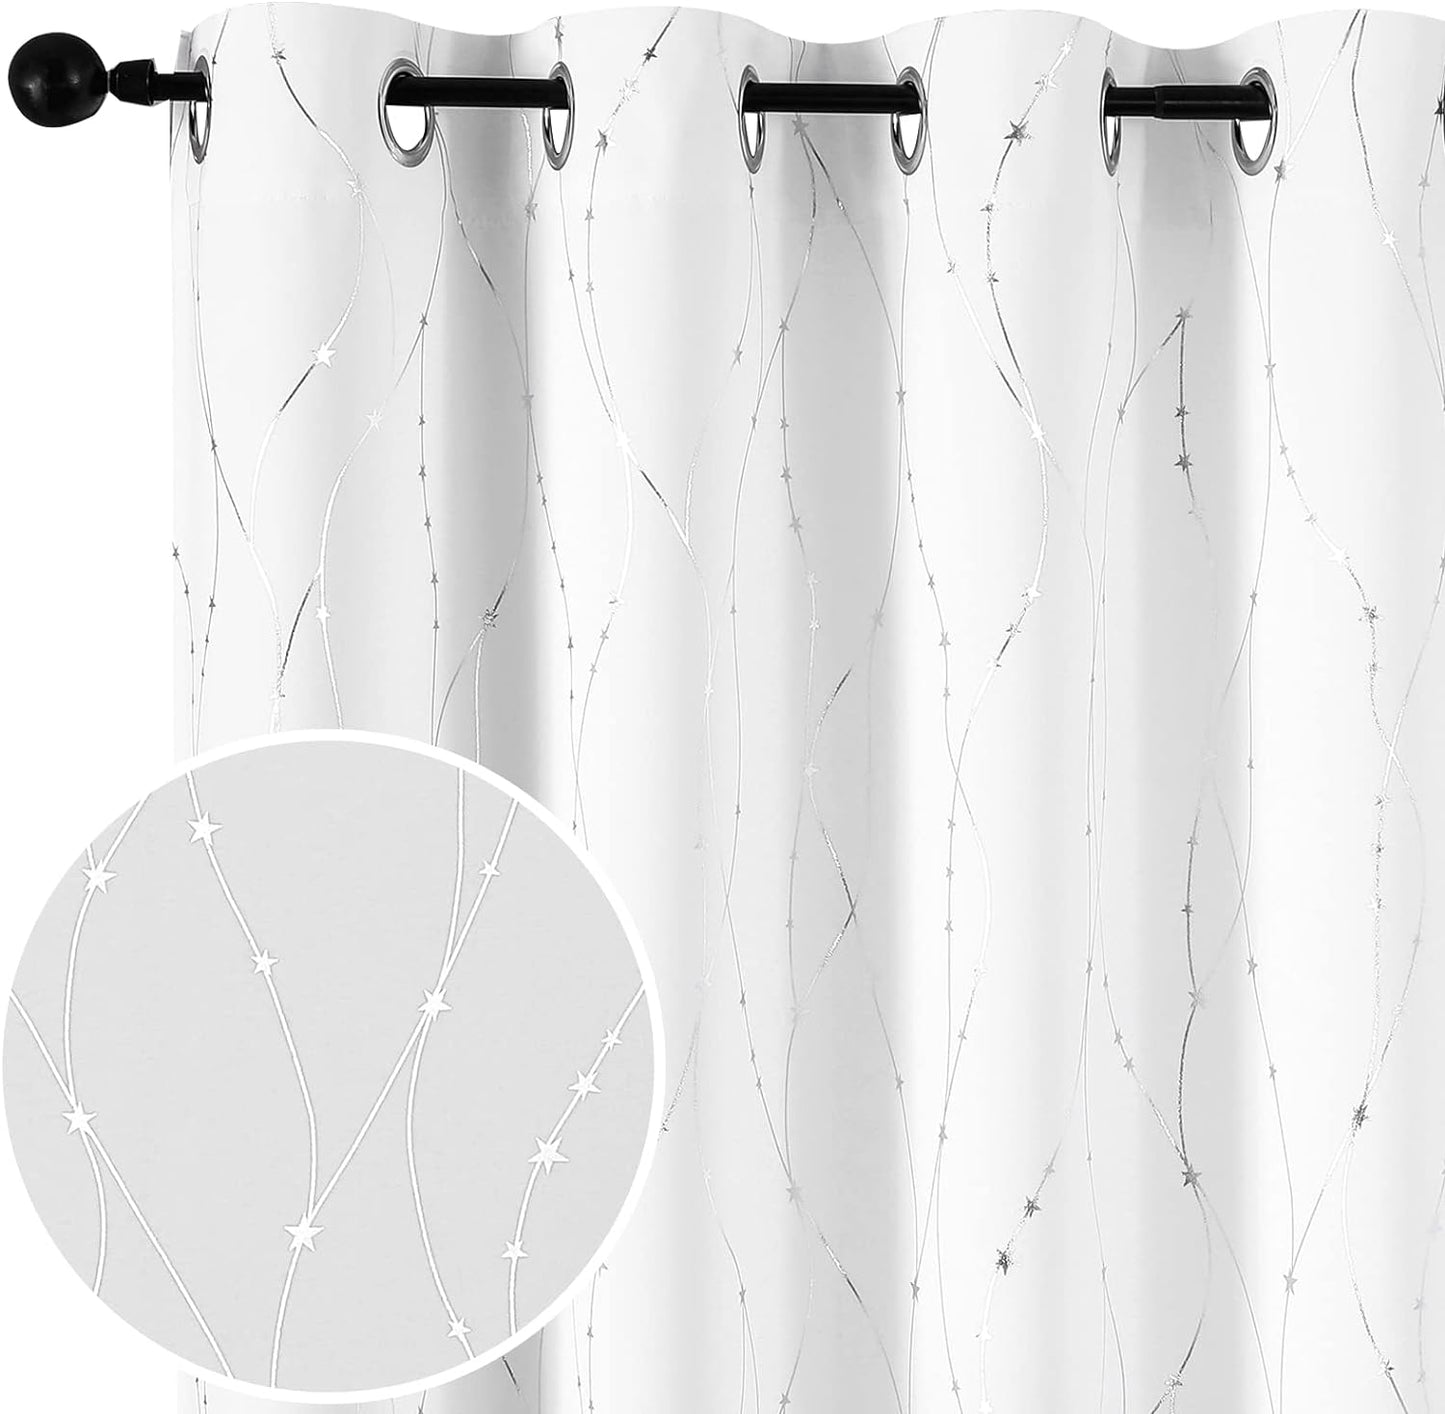 SMILE WEAVER Black Blackout Curtains for Bedroom 72 Inch Long 2 Panels,Room Darkening Curtain with Gold Print Design Noise Reducing Thermal Insulated Window Treatment Drapes for Living Room  SMILE WEAVER White Silver 52Wx96L 